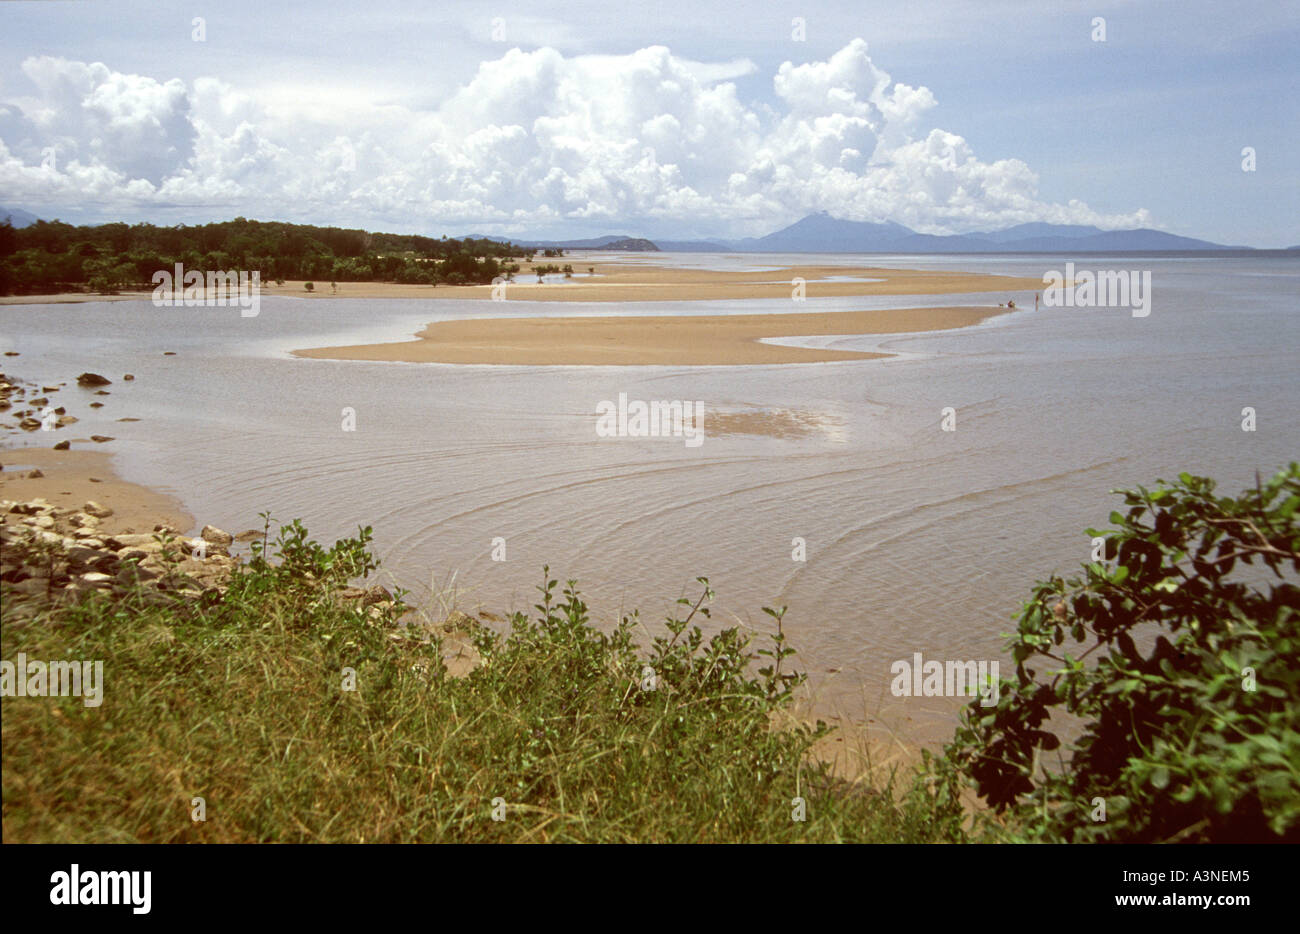 Isolated golden sandy beach with sand bars Yule Point Qld Australia Stock Photo